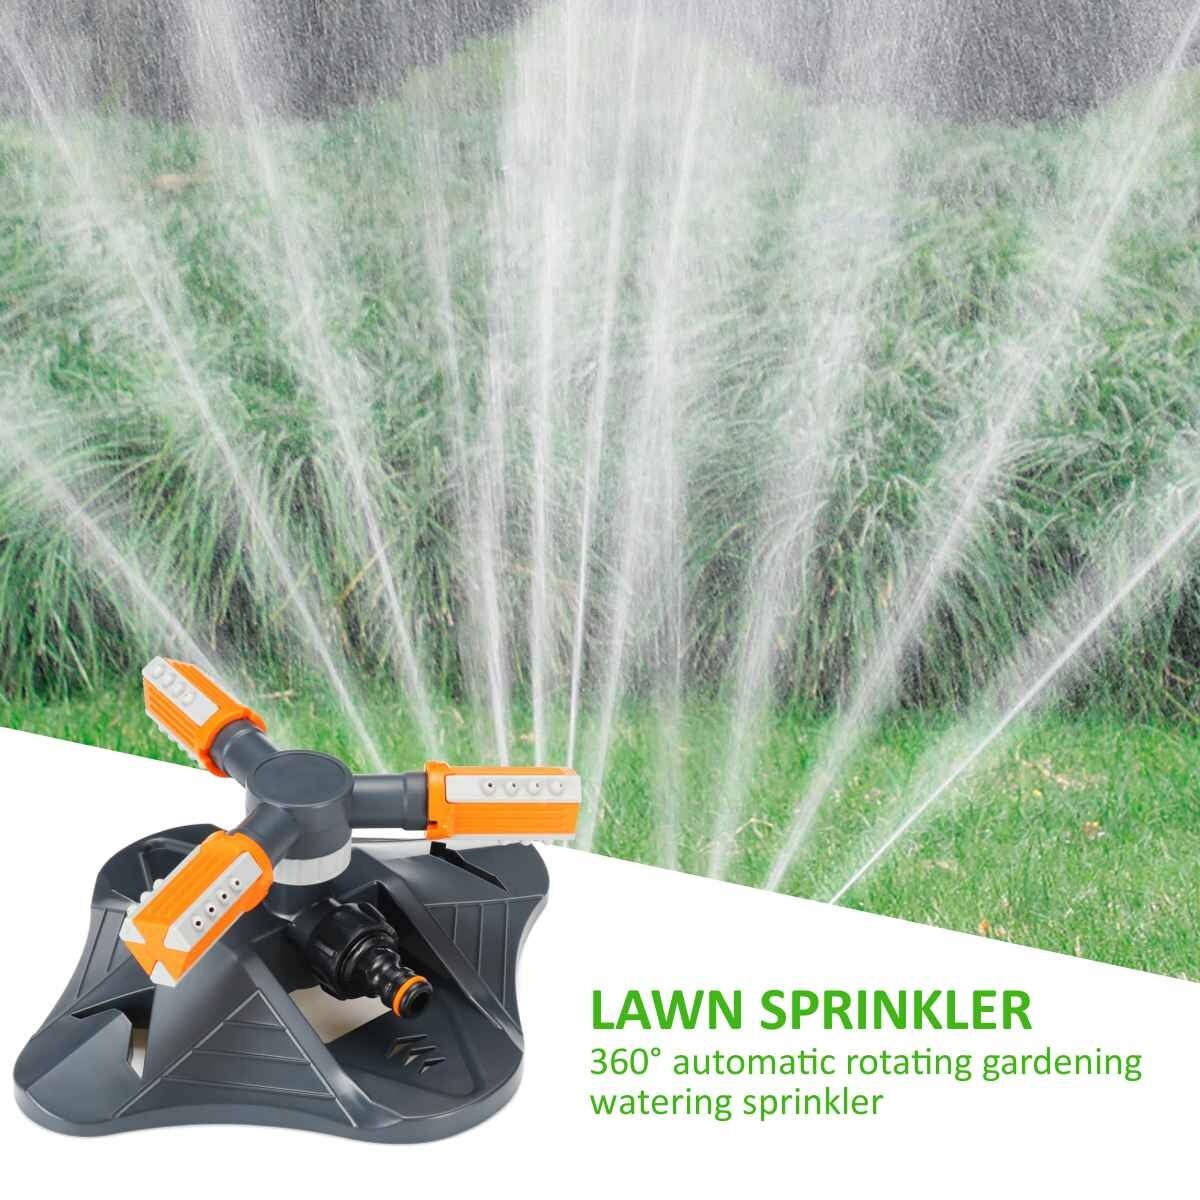 3 Armsx 360° Automatic Garden Sprinklers Watering Grass Lawn Rotary Nozzle Rotating Water Sprinkler System Garden Suppli Green - 1